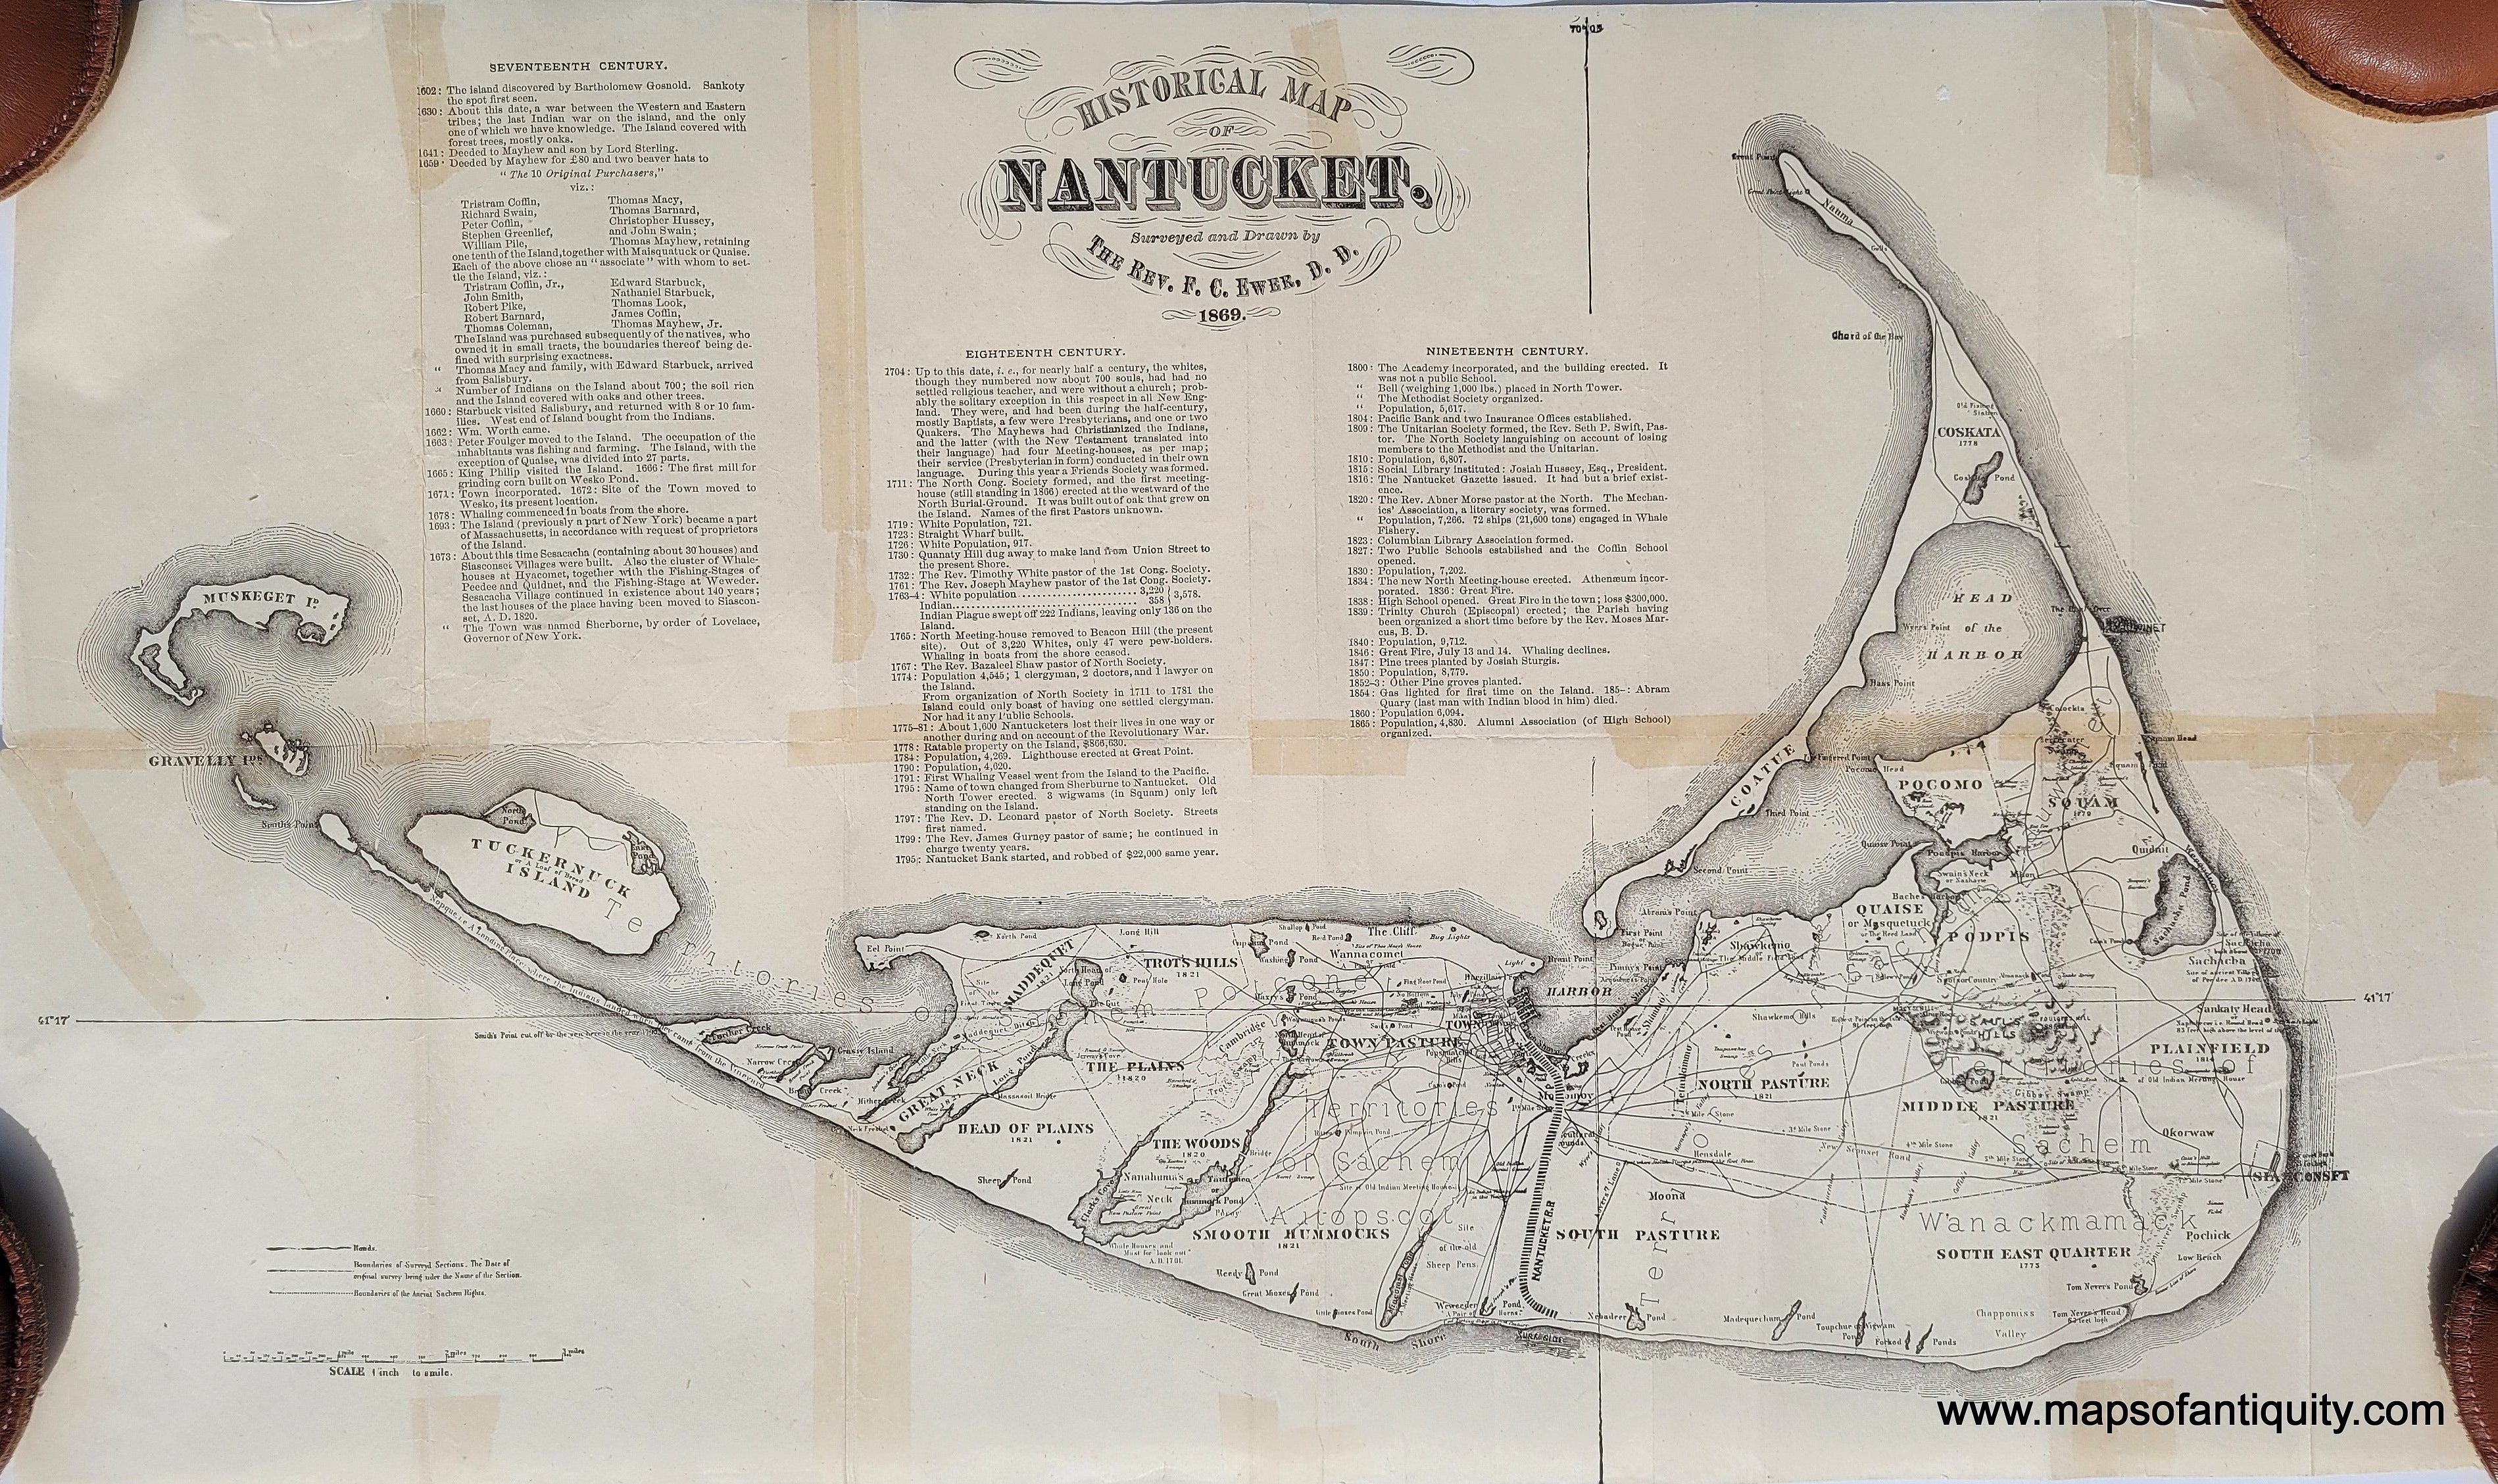 1869-1889 Antique Map Historical Map of Nantucket – Maps of Antiquity